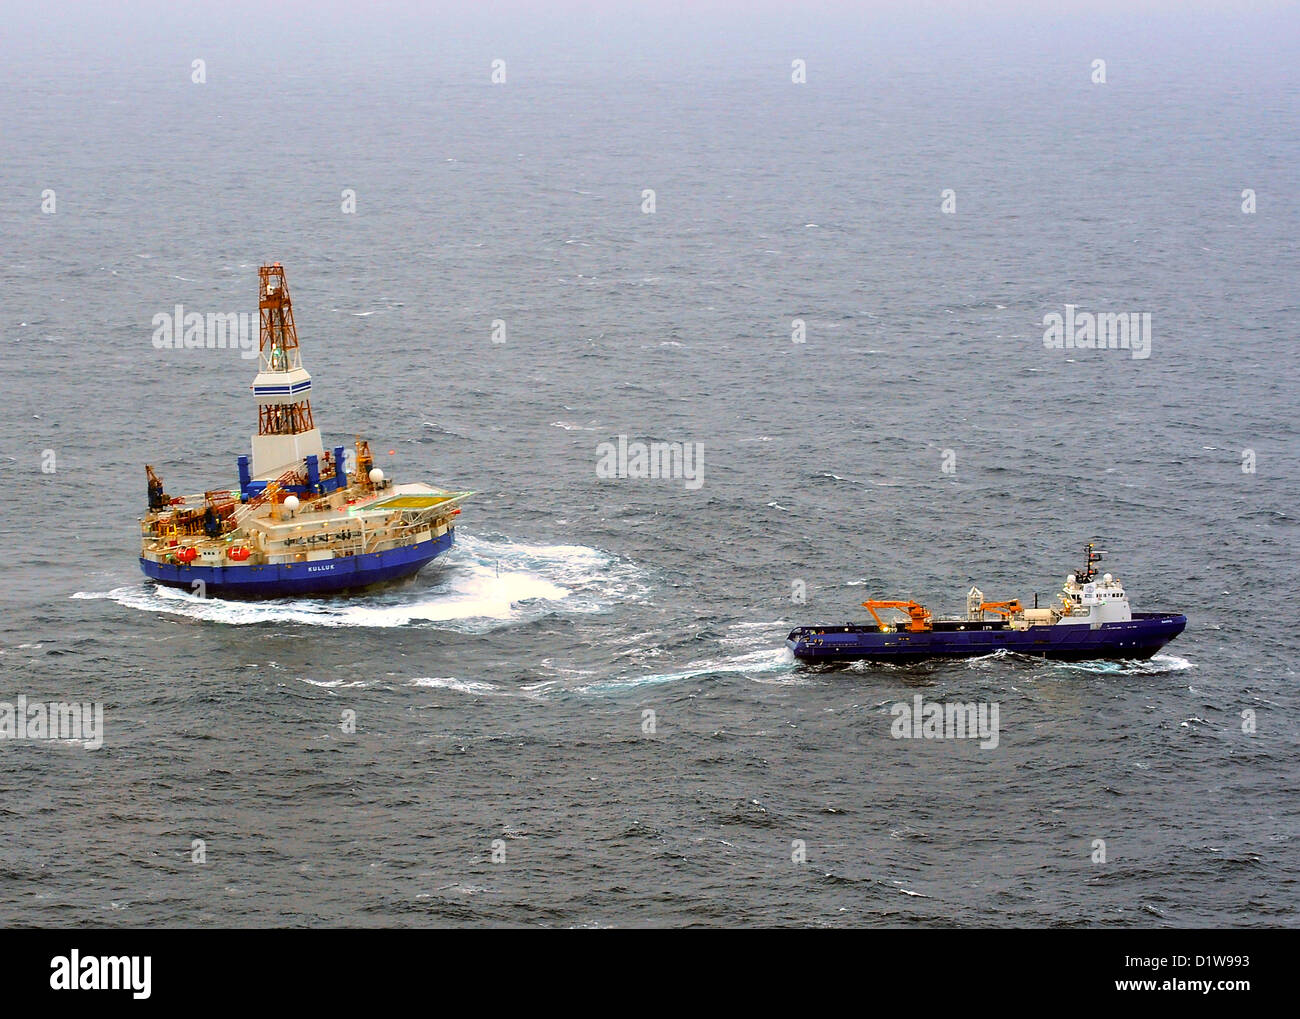 The tug boat Nanuq attempts to tow the mobile drilling platform Kulluk in 15 to 20-foot seas December 29, 2012, 80 miles southwest of Kodiak City, Alaska. The tug Aiviq lost the initial tow Thursday and suffered several engine failures resulting in US Coast Guard rescue response. Stock Photo